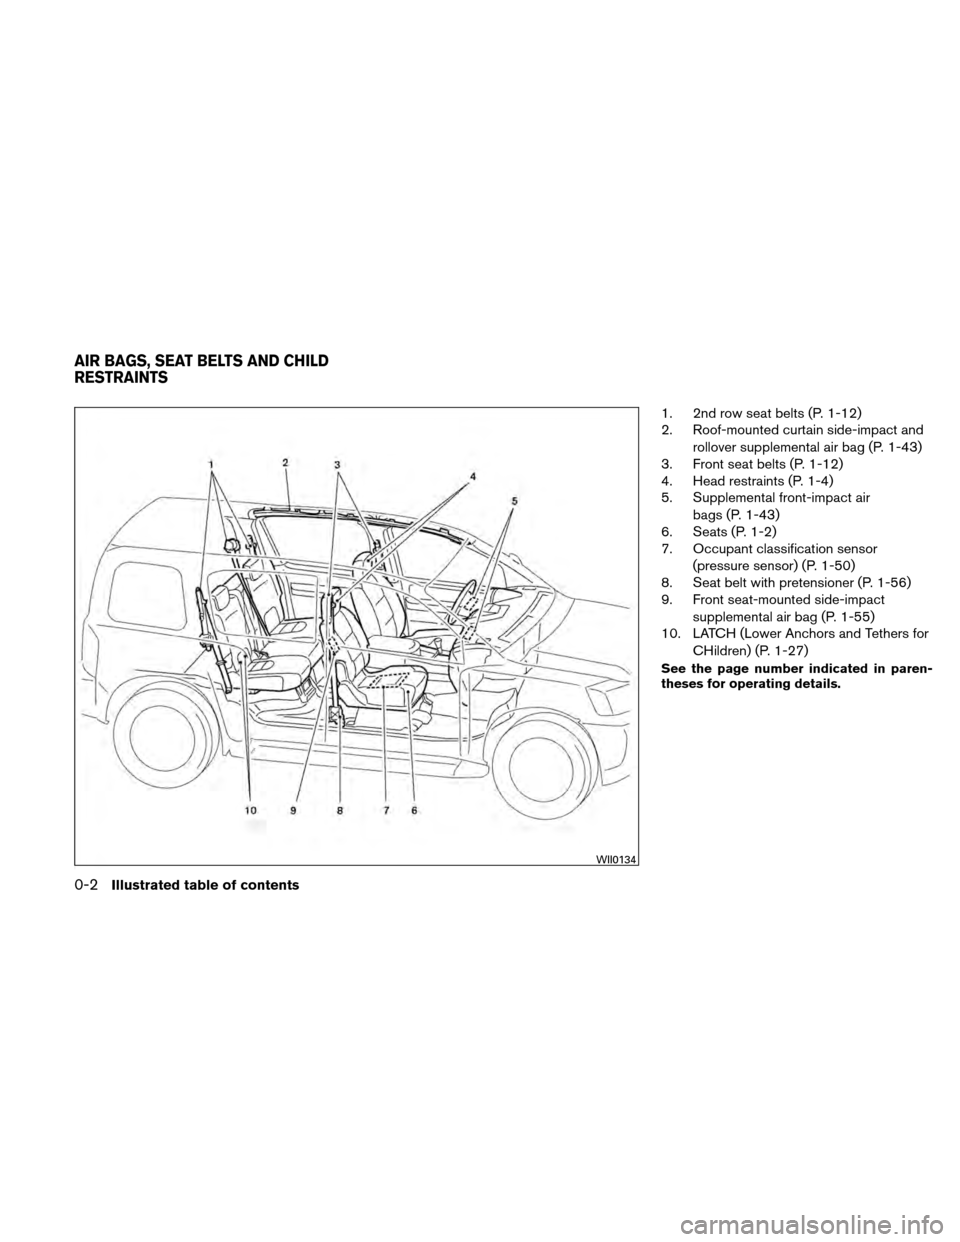 NISSAN XTERRA 2011 N50 / 2.G Owners Manual 1. 2nd row seat belts (P. 1-12)
2. Roof-mounted curtain side-impact androllover supplemental air bag (P. 1-43)
3. Front seat belts (P. 1-12)
4. Head restraints (P. 1-4)
5. Supplemental front-impact ai